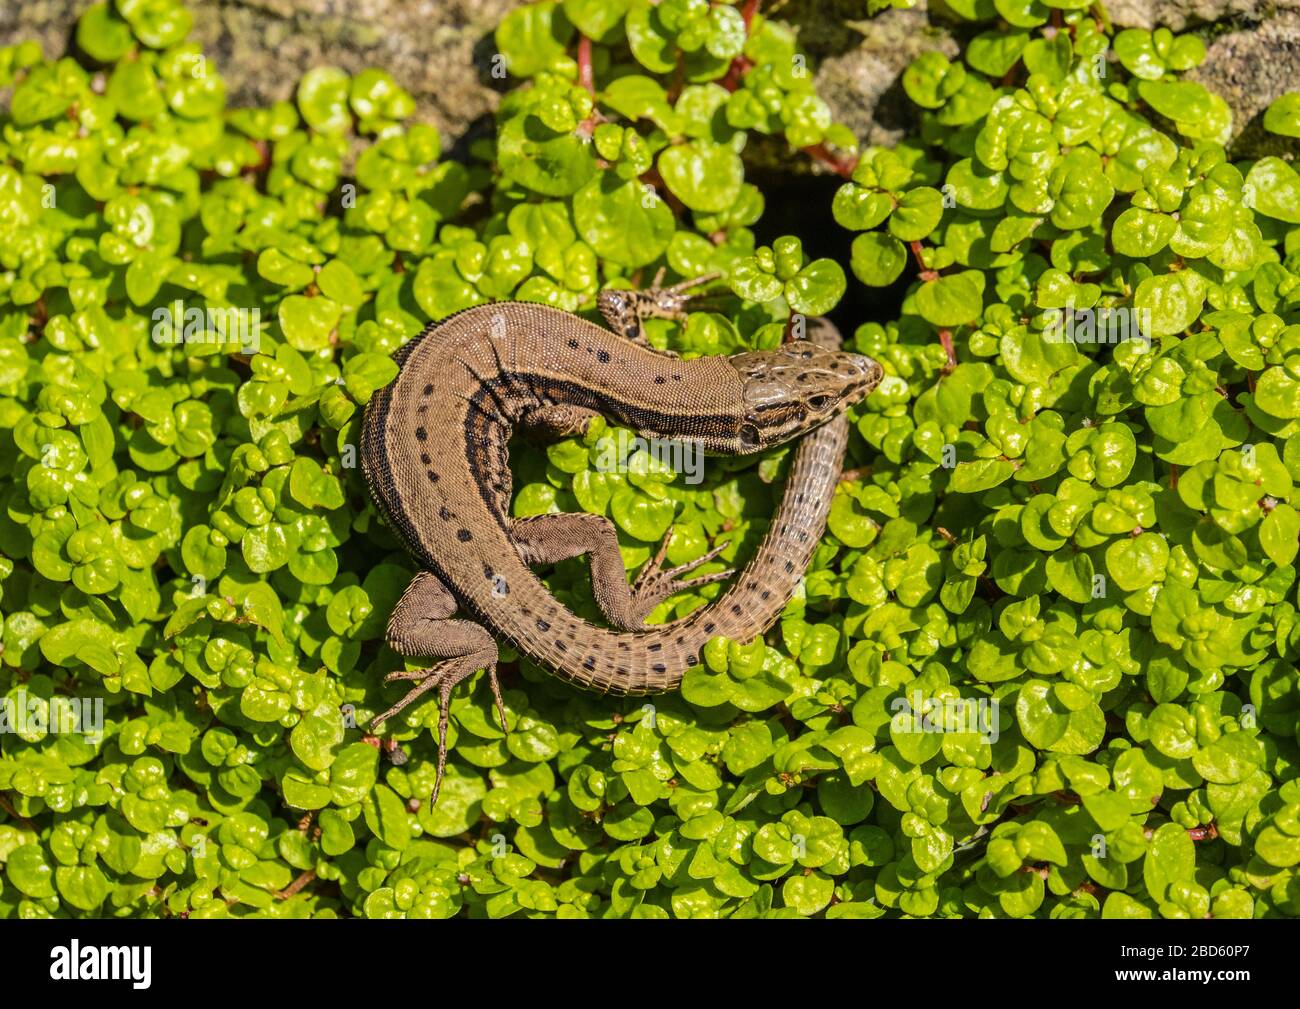 A Common Lizard (Zootoca vivpara) or 'viviparous lizard', lying on a bed of green leaves, basking in the sunshine, Stock Photo